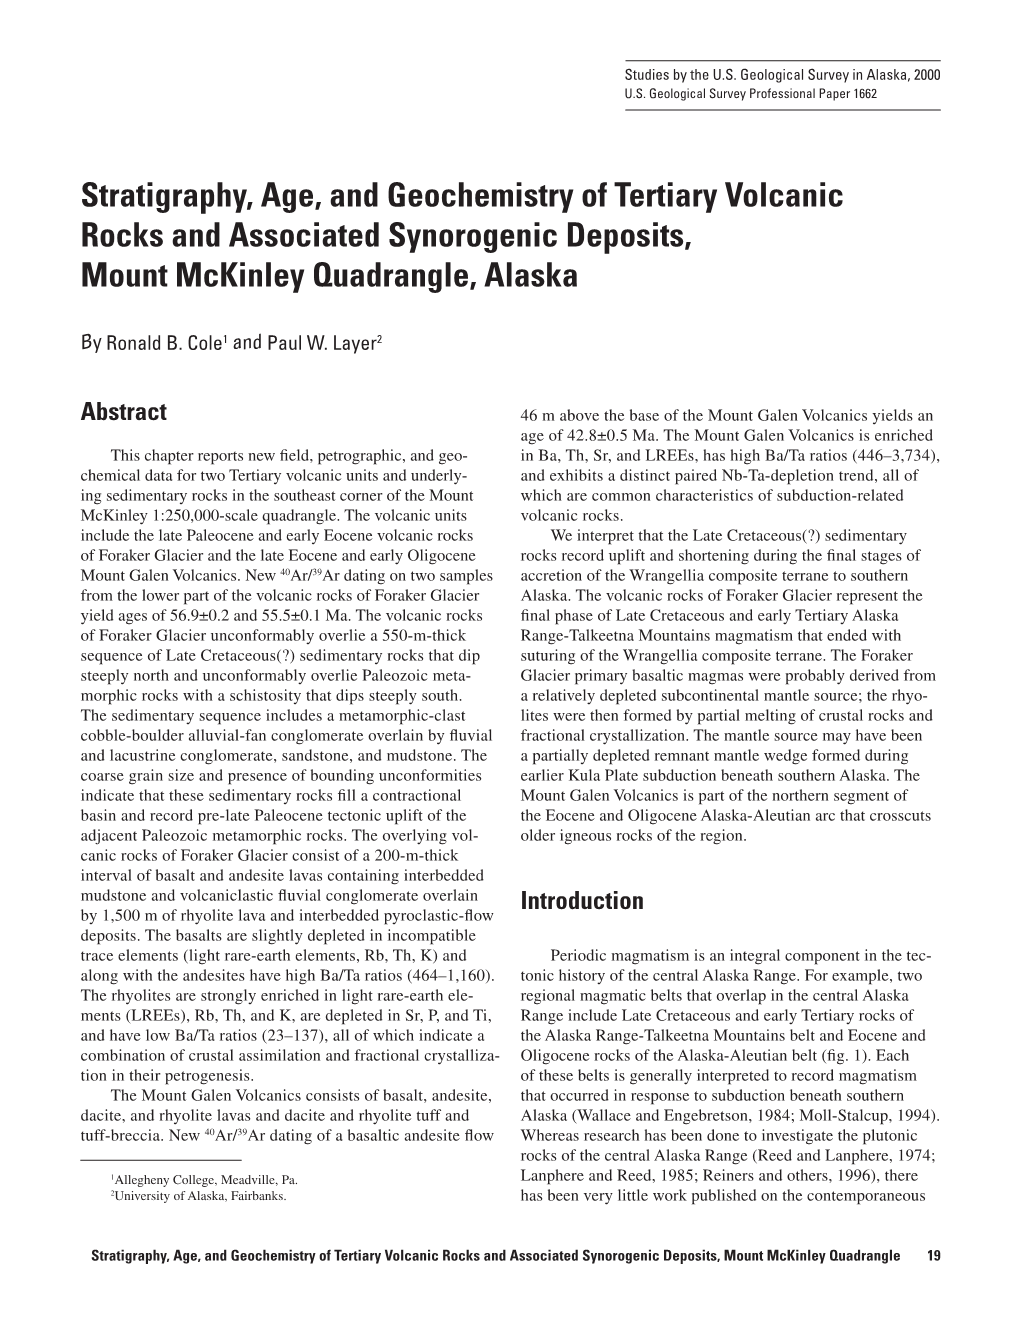 Stratigraphy, Age, and Geochemistry of Tertiary Volcanic Rocks and Associated Synorogenic Deposits, Mount Mckinley Quadrangle, Alaska